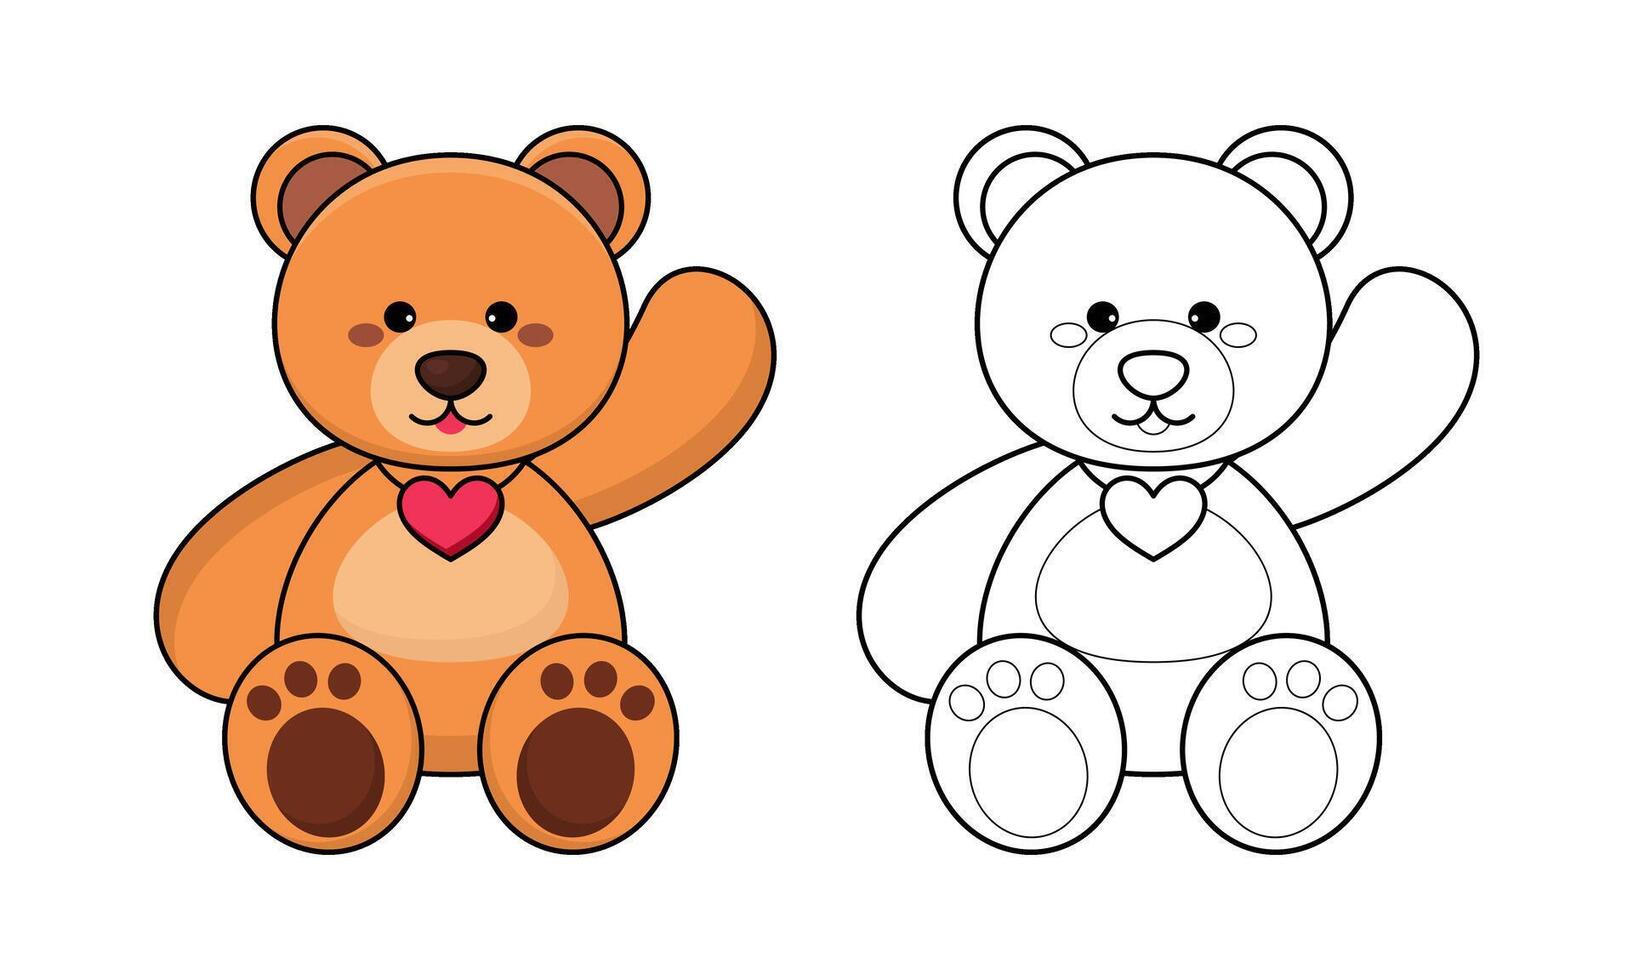 Outlined Cute Cartoon Teddy Bear Coloring Page Vector Illustration Isolated on White Background